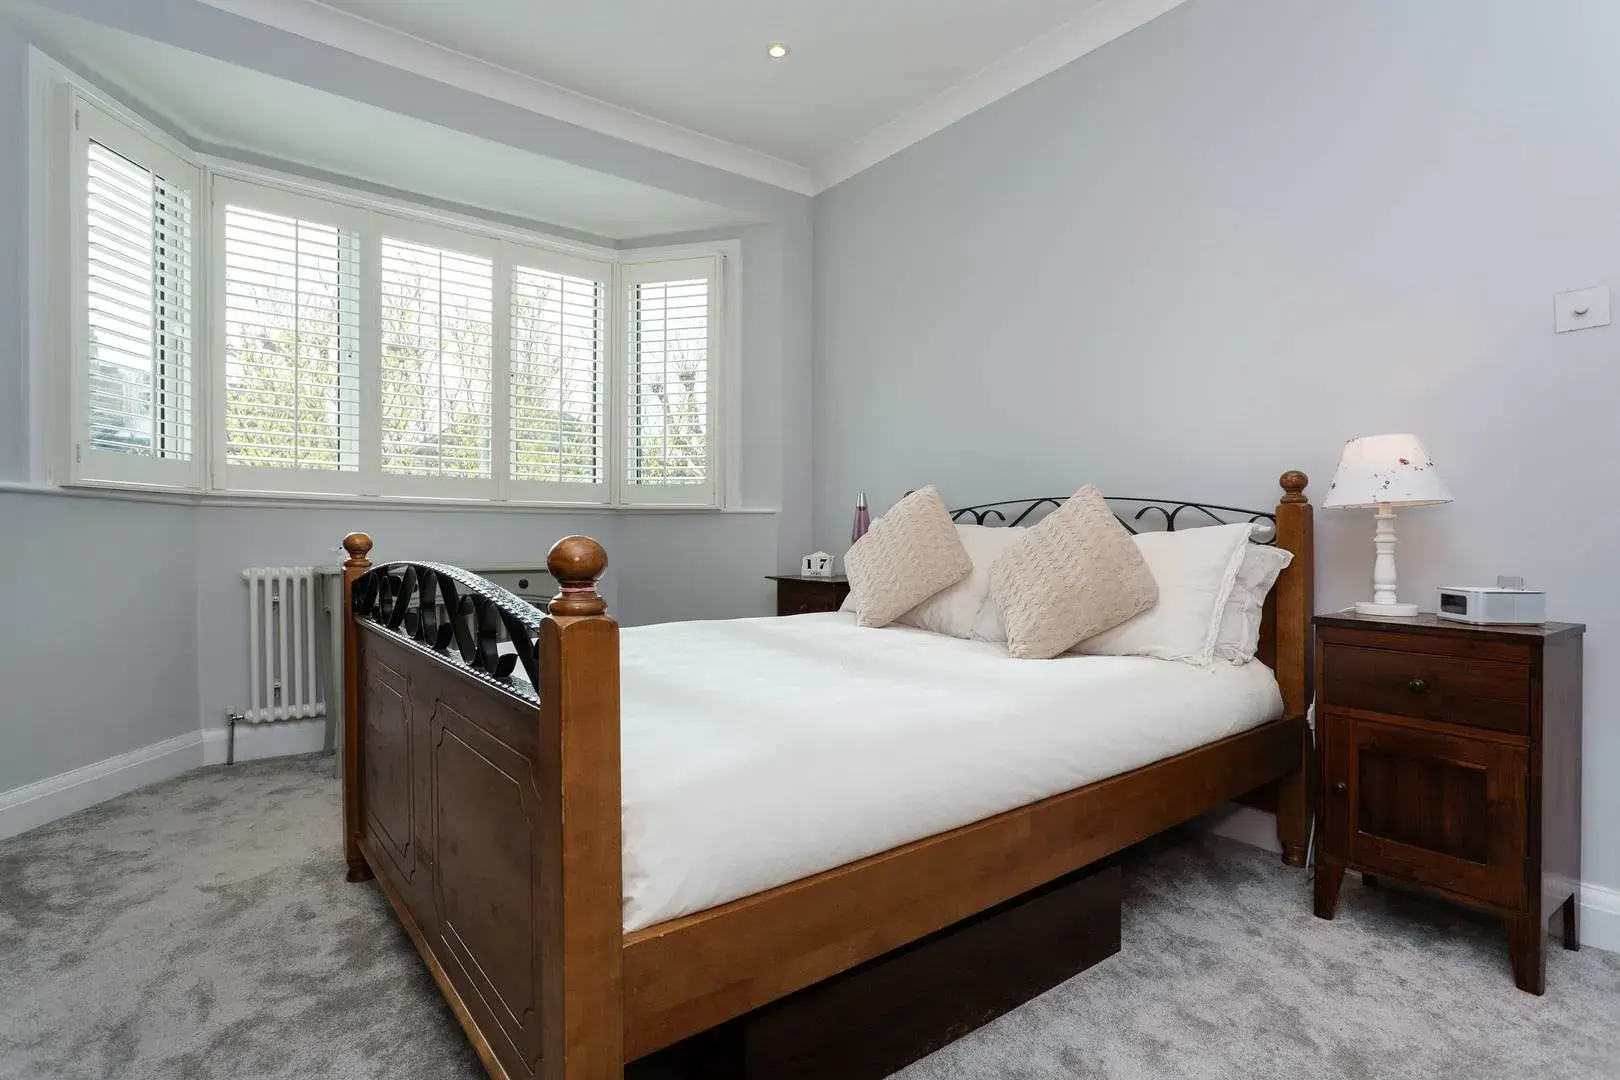 Sutherland Grove, holiday home in Wimbledon – South London, London